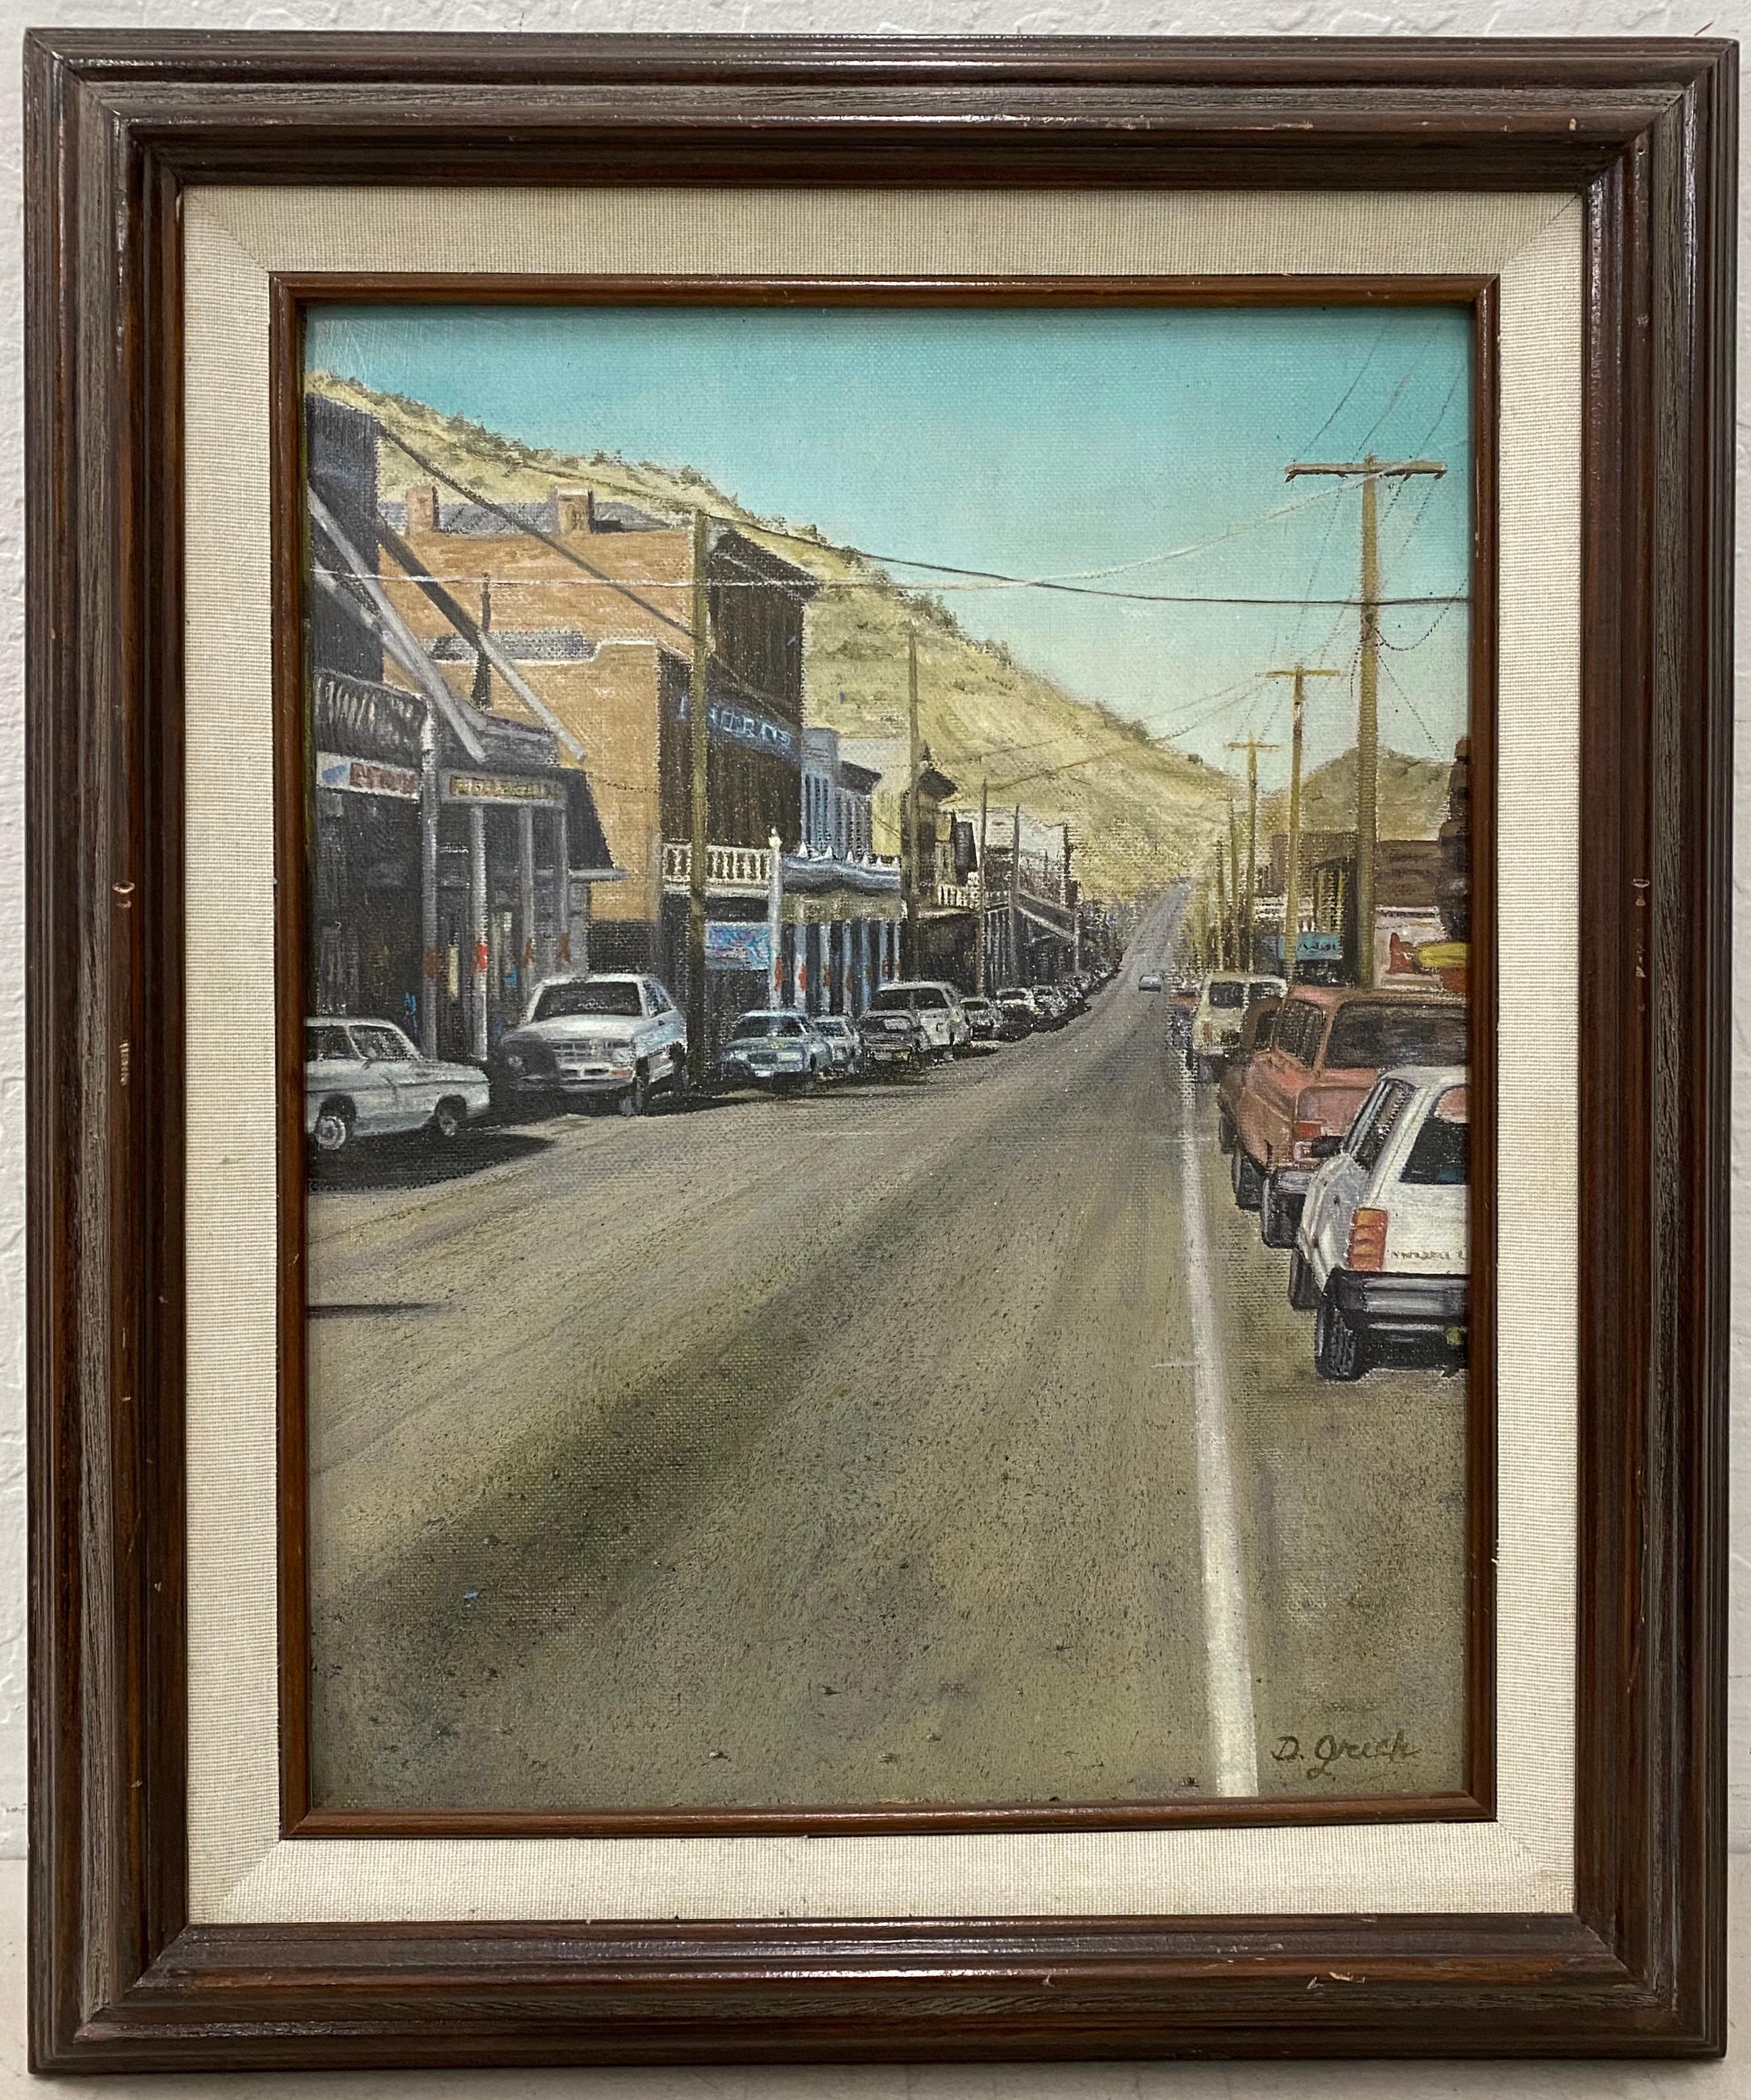 Unknown Landscape Painting - Vintage Oil Painting California Sierra Foothills Town by D. Grech c.1997